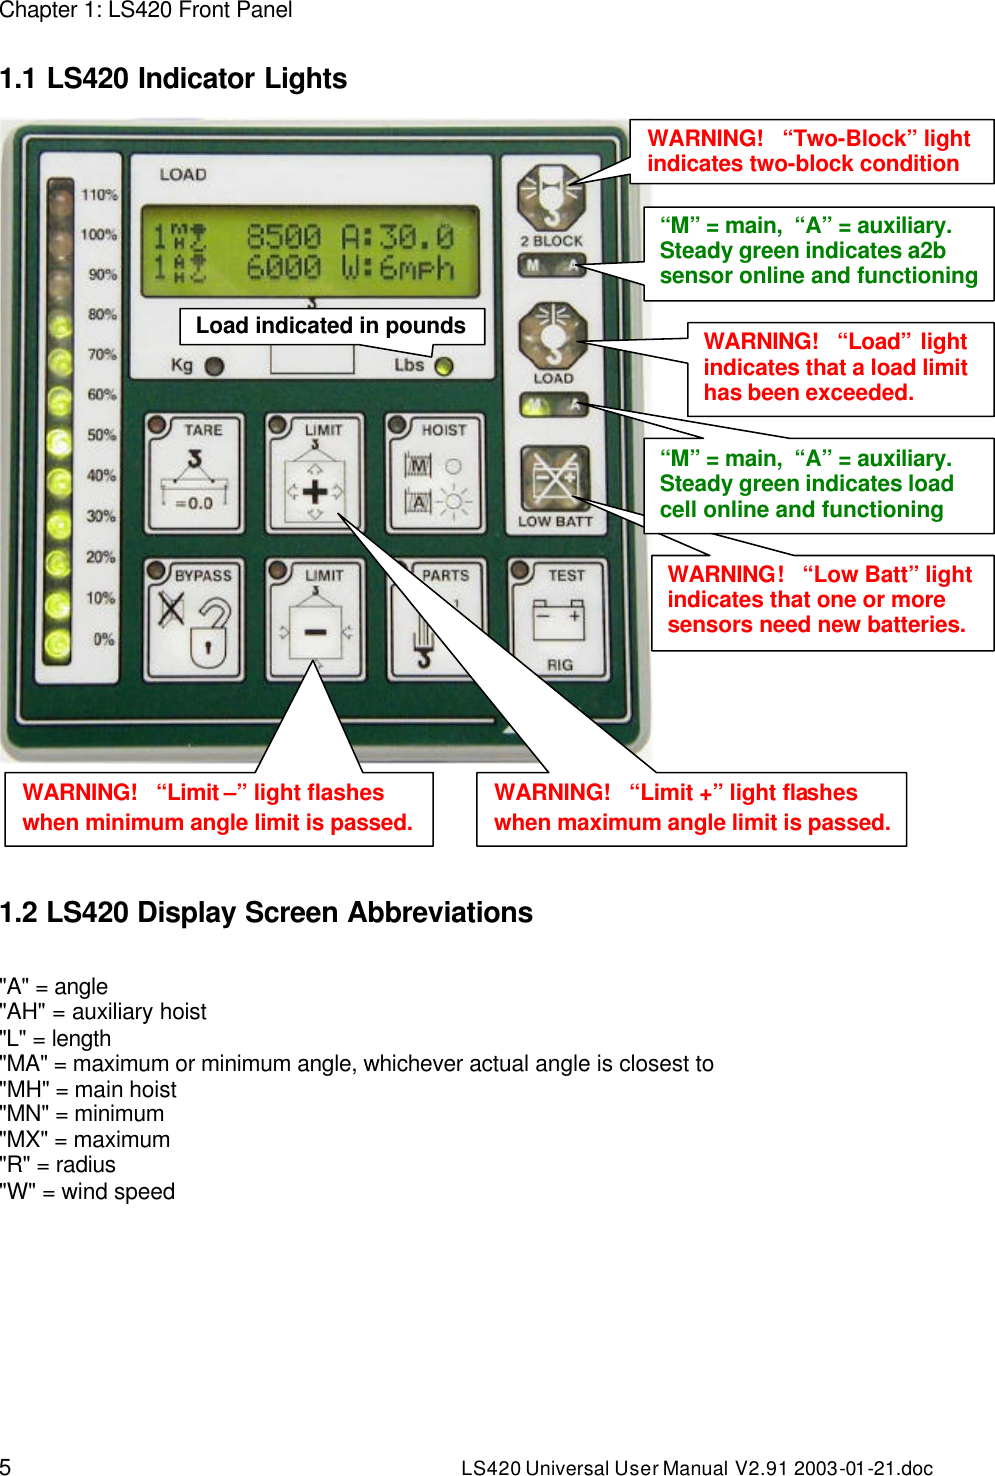 5 LS420 Universal User Manual V2.91 2003-01 -21.doc Chapter 1: LS420 Front Panel   1.1 LS420 Indicator Lights       1.2 LS420 Display Screen Abbreviations  &quot;A&quot; = angle &quot;AH&quot; = auxiliary hoist &quot;L&quot; = length &quot;MA&quot; = maximum or minimum angle, whichever actual angle is closest to &quot;MH&quot; = main hoist &quot;MN&quot; = minimum &quot;MX&quot; = maximum &quot;R&quot; = radius &quot;W&quot; = wind speed WARNING!   “Two-Block” light indicates two-block condition WARNING!   “Load” light indicates that a load limit has been exceeded. WARNING!   “Limit –” light flashes when minimum angle limit is passed. WARNING!   “Low Batt” light indicates that one or more sensors need new batteries. “M” = main,  “A” = auxiliary. Steady green indicates a2b sensor online and functioningLoad indicated in pounds WARNING!   “Limit +” light flashes when maximum angle limit is passed. “M” = main,  “A” = auxiliary. Steady green indicates load cell online and functioning 